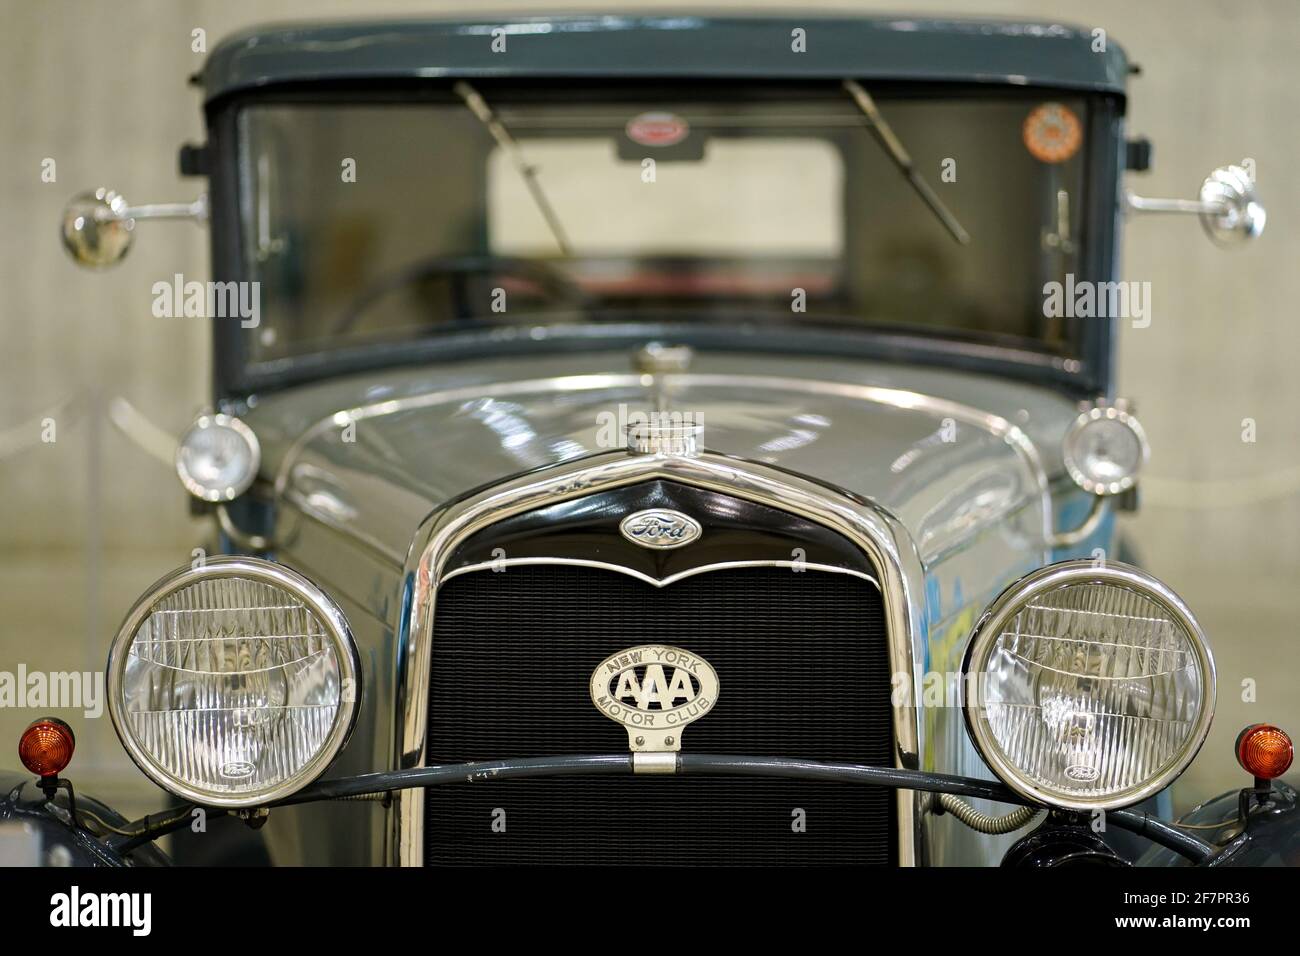 Chiba, Japan. 9th Apr, 2021. The front end of a 1931 Ford Model A coupe is seen on display during the Automobile Council 2021 car show at Makuhari Messe convention center in Chiba, Japan on April 9, 2021. The show, displaying a wide range of classic vehicles, aims to promote automobile culture and lifestyle in Japan. Credit: Christopher Jue/Xinhua/Alamy Live News Stock Photo